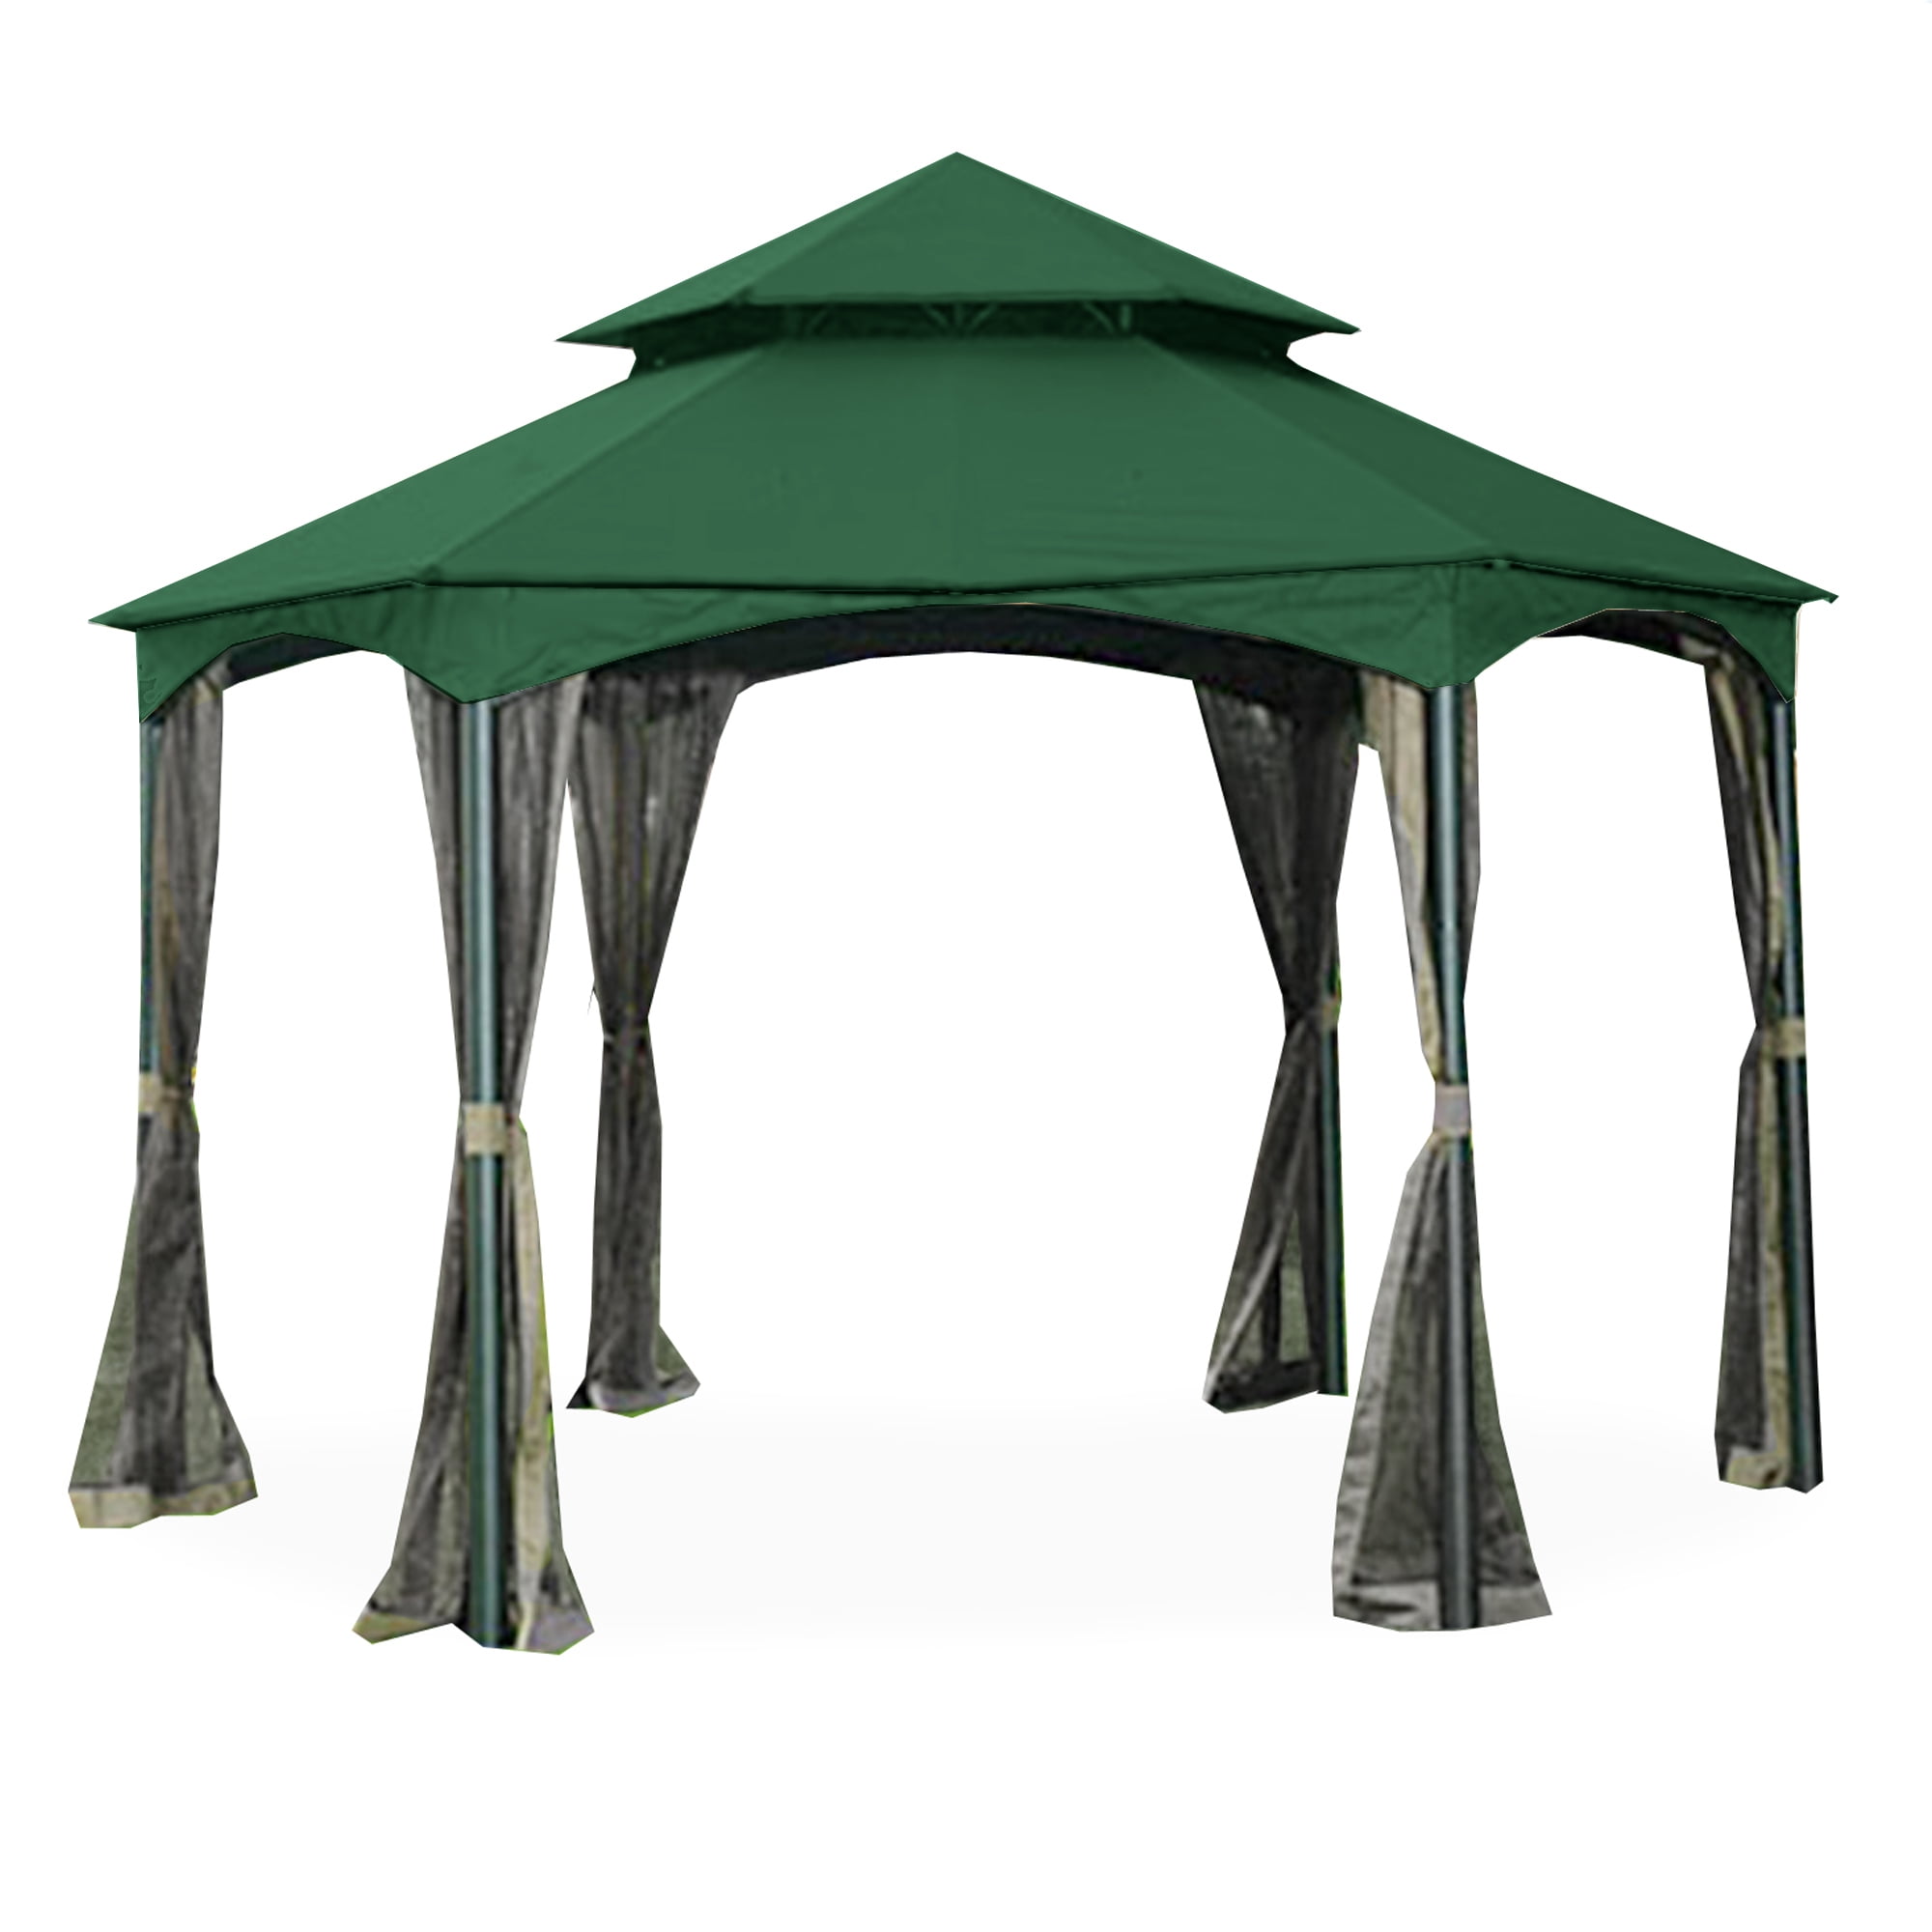 Details about   Garden Winds Replacement Canopy Top Cover for The Hexagon Solar Gazebo Beige 